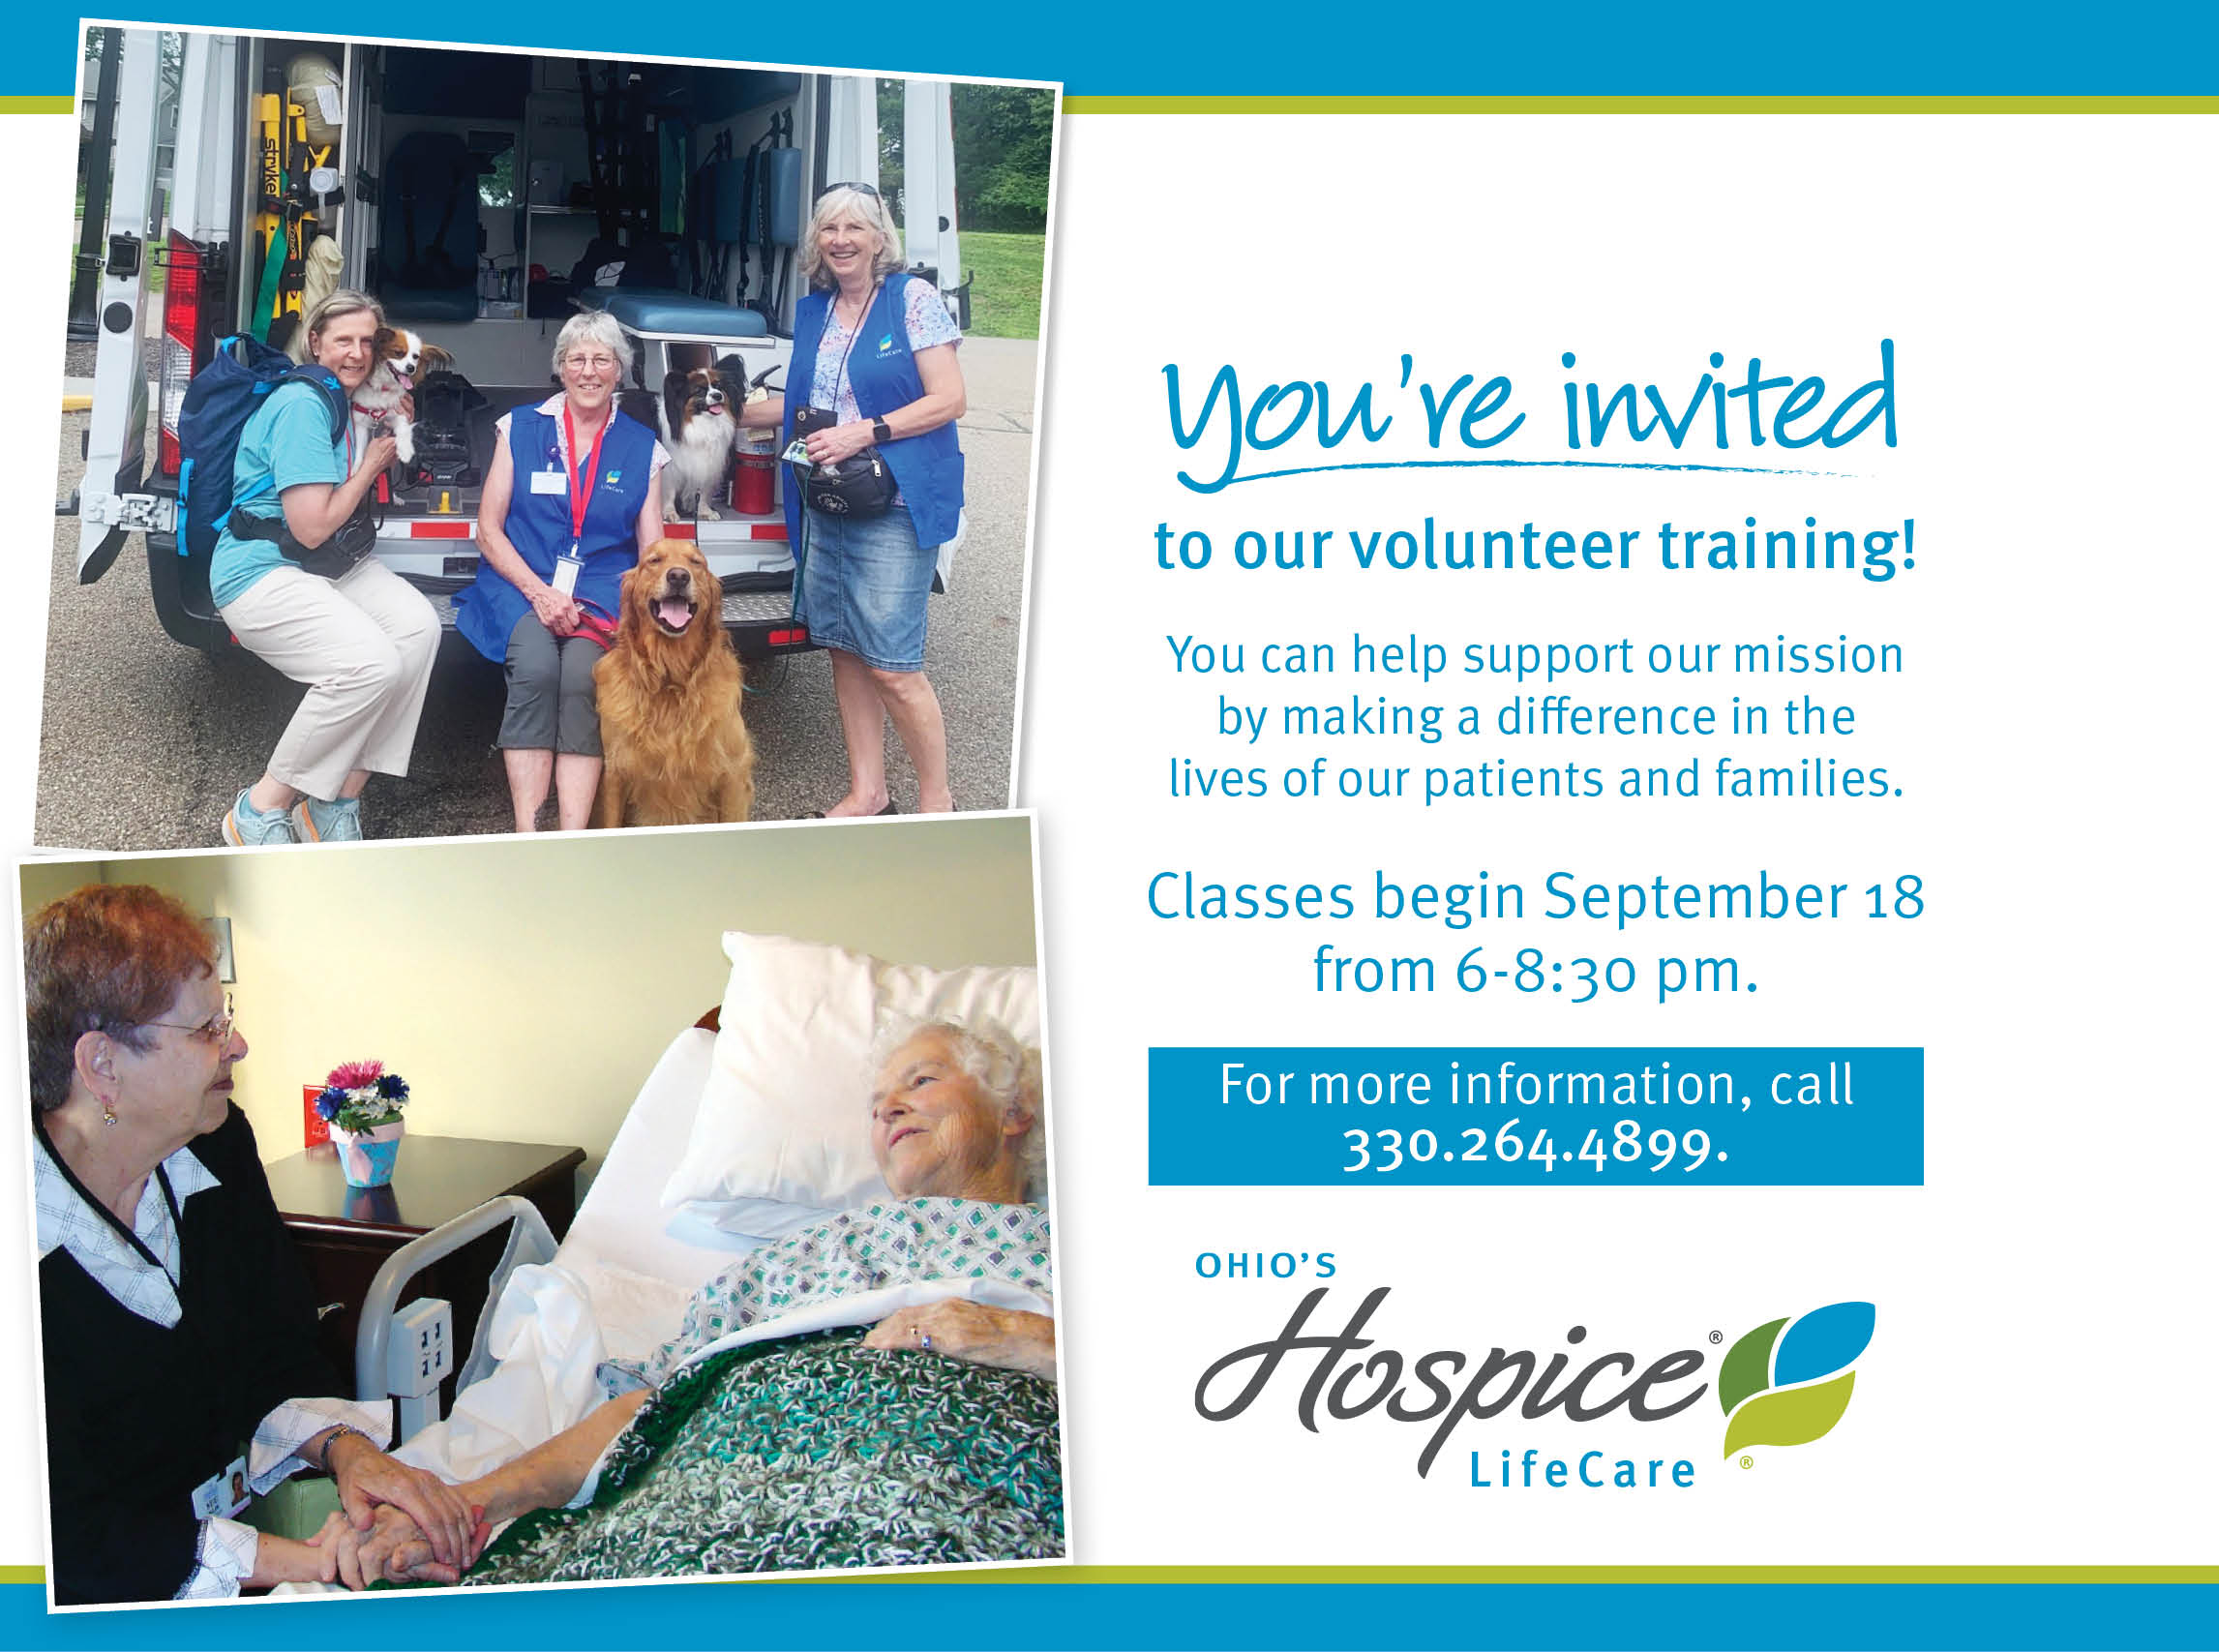 You're invited to our volunteer training! Classes begin September 18 from 6-8:30 pm. Call 330.264.4899. Ohio's Hospice LifeCare